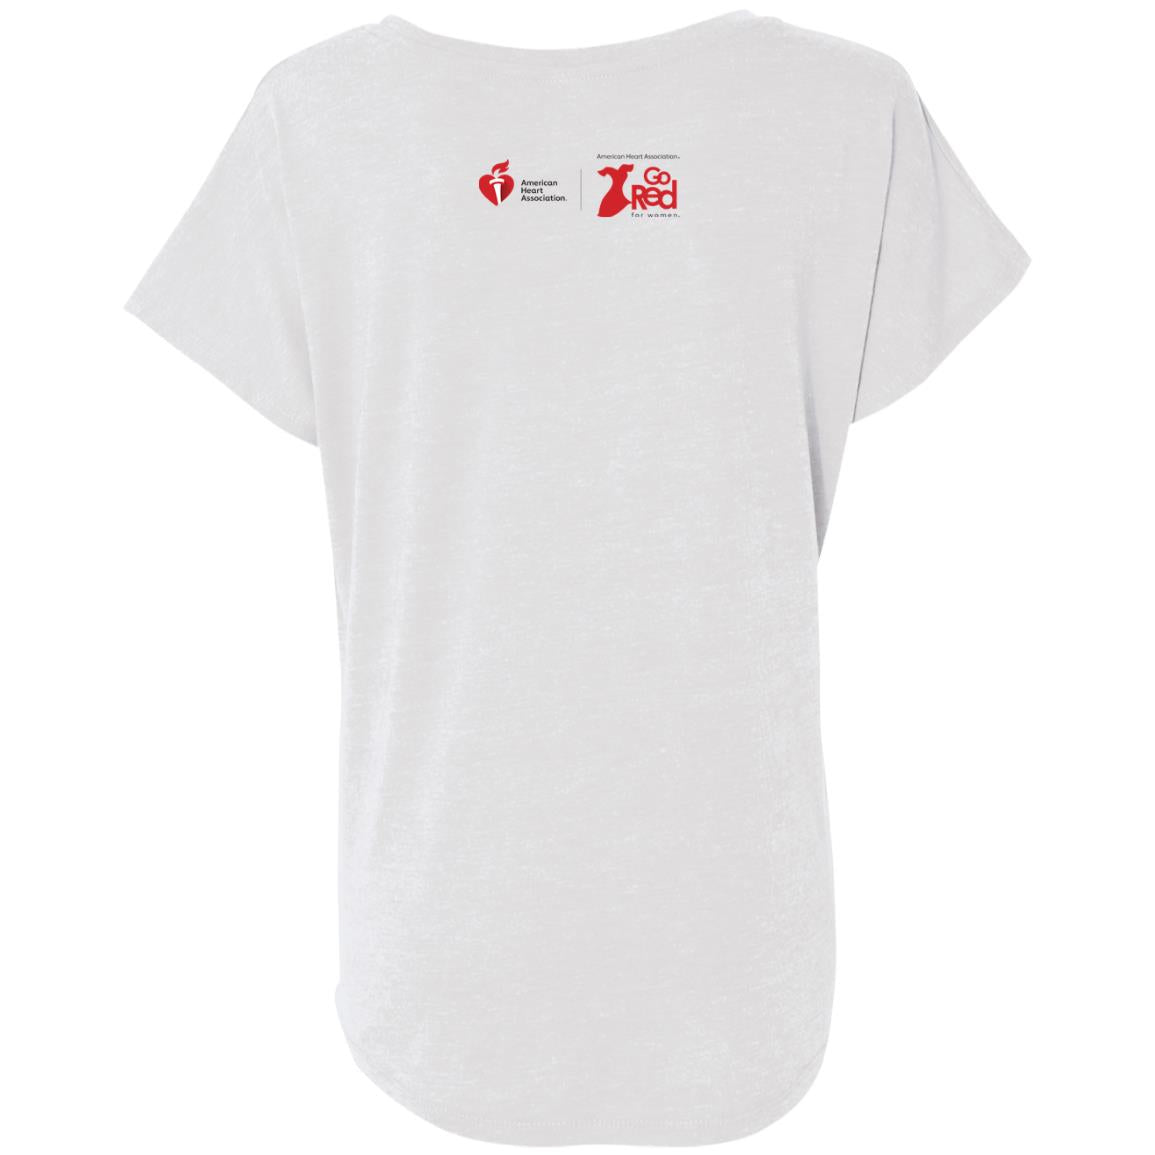 Back of tee includes AHA and Go Red brand symbols placed on the top of back.